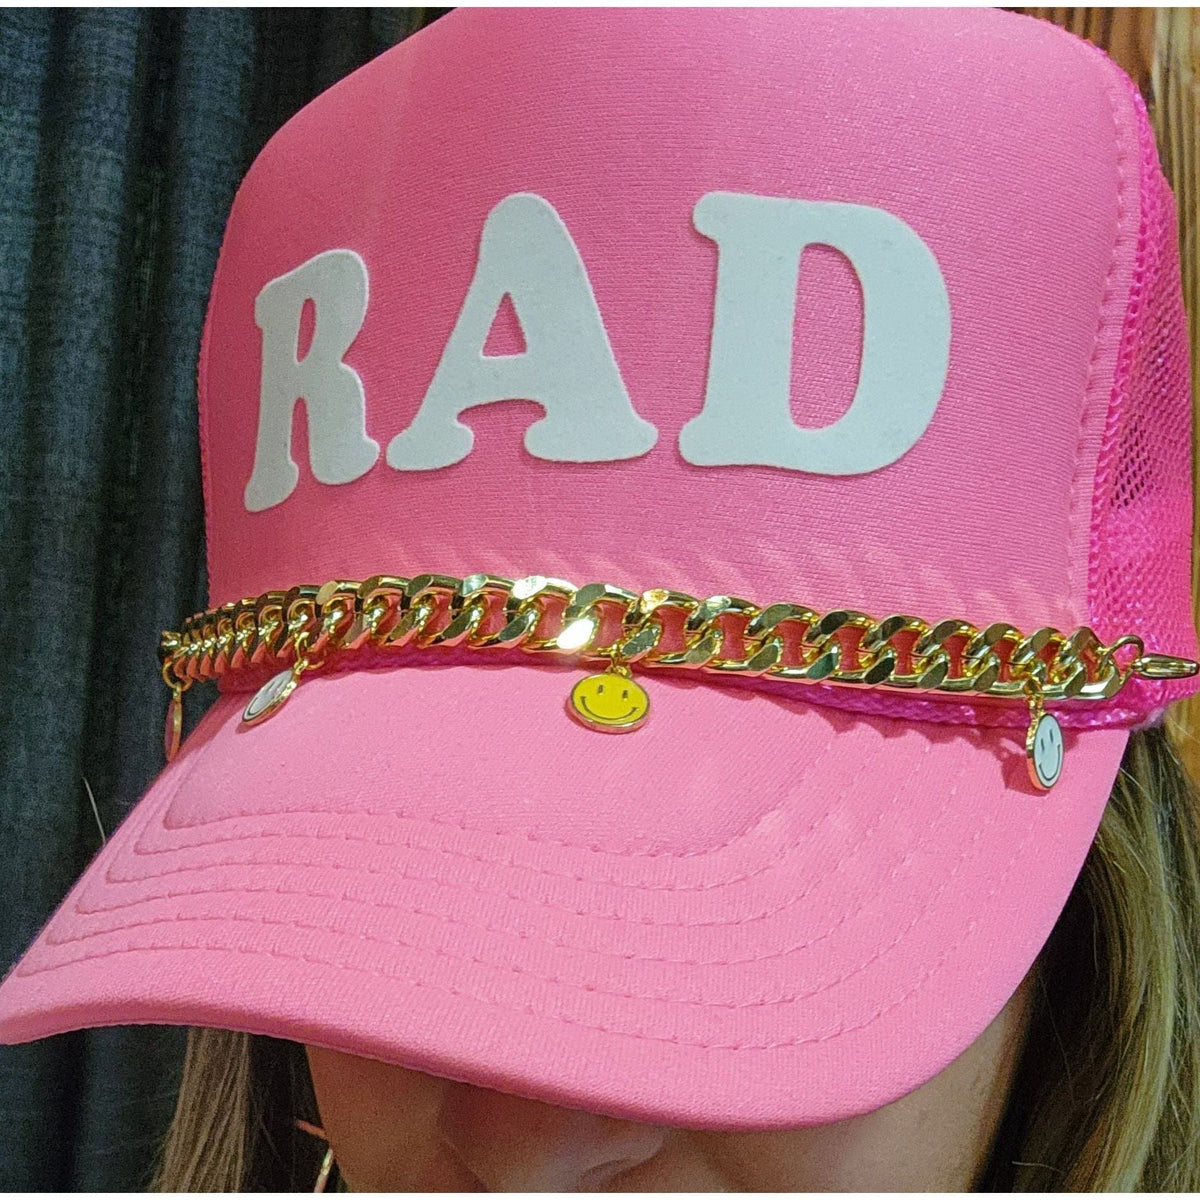 Gold Trucker Chains | Hat Chains by Haute Sheet Hats TheFringeCultureCollective